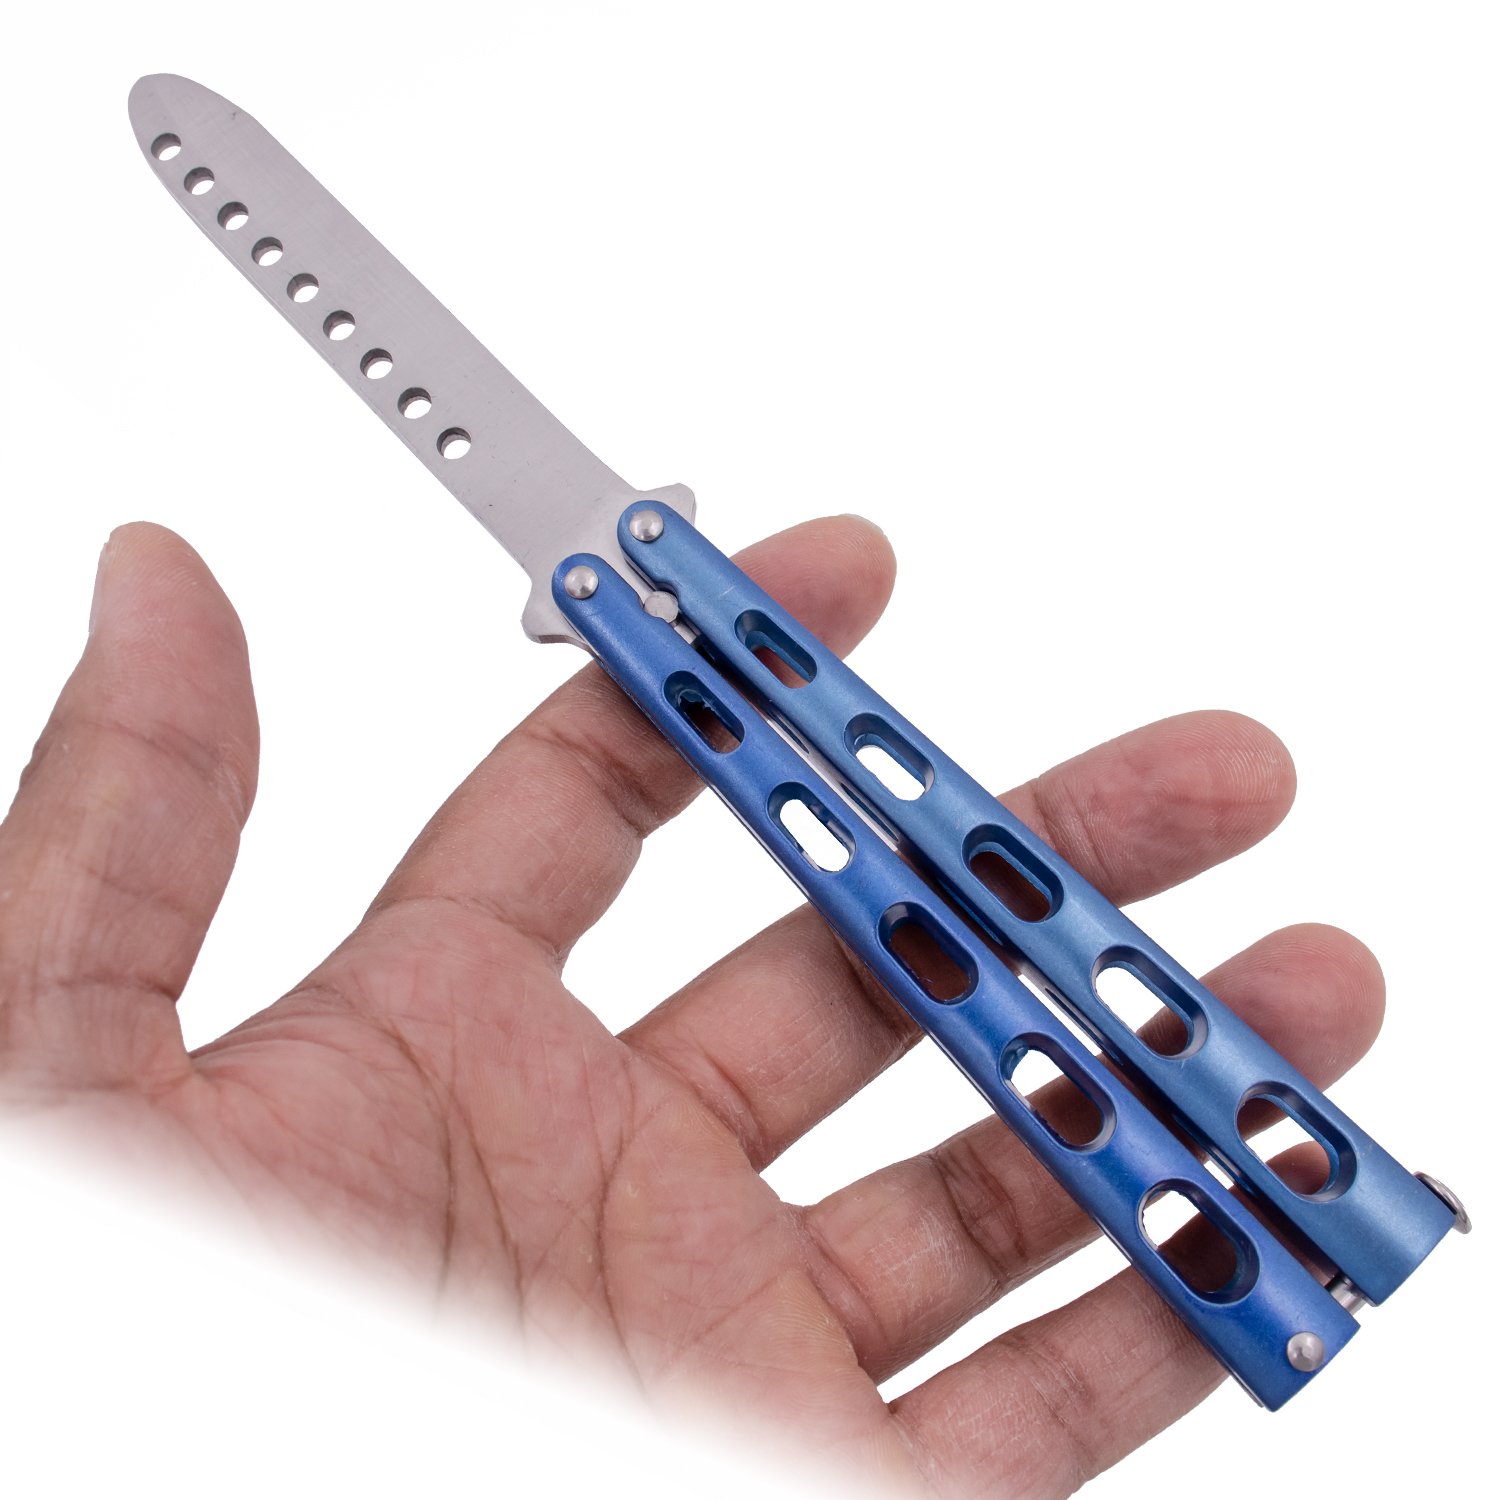 Tiger USA Butterfly Training Knife 440 Stainless 8.85 Inch   Blue Picture 2